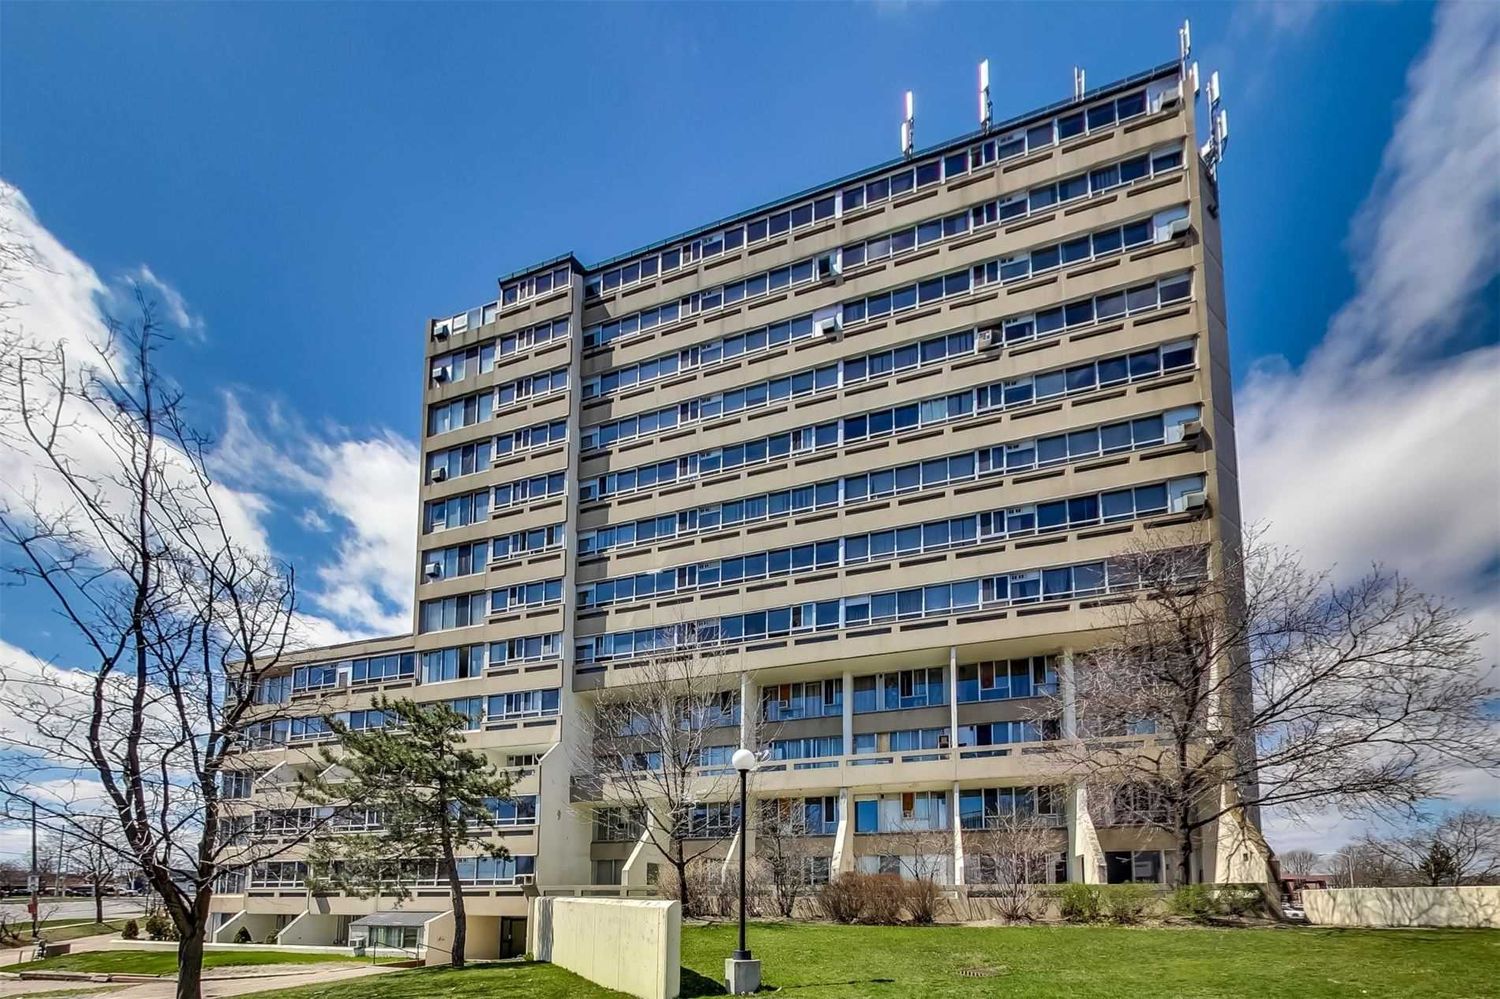 5580 Sheppard Avenue E. Sheppard Place Condominium is located in  Scarborough, Toronto - image #1 of 2